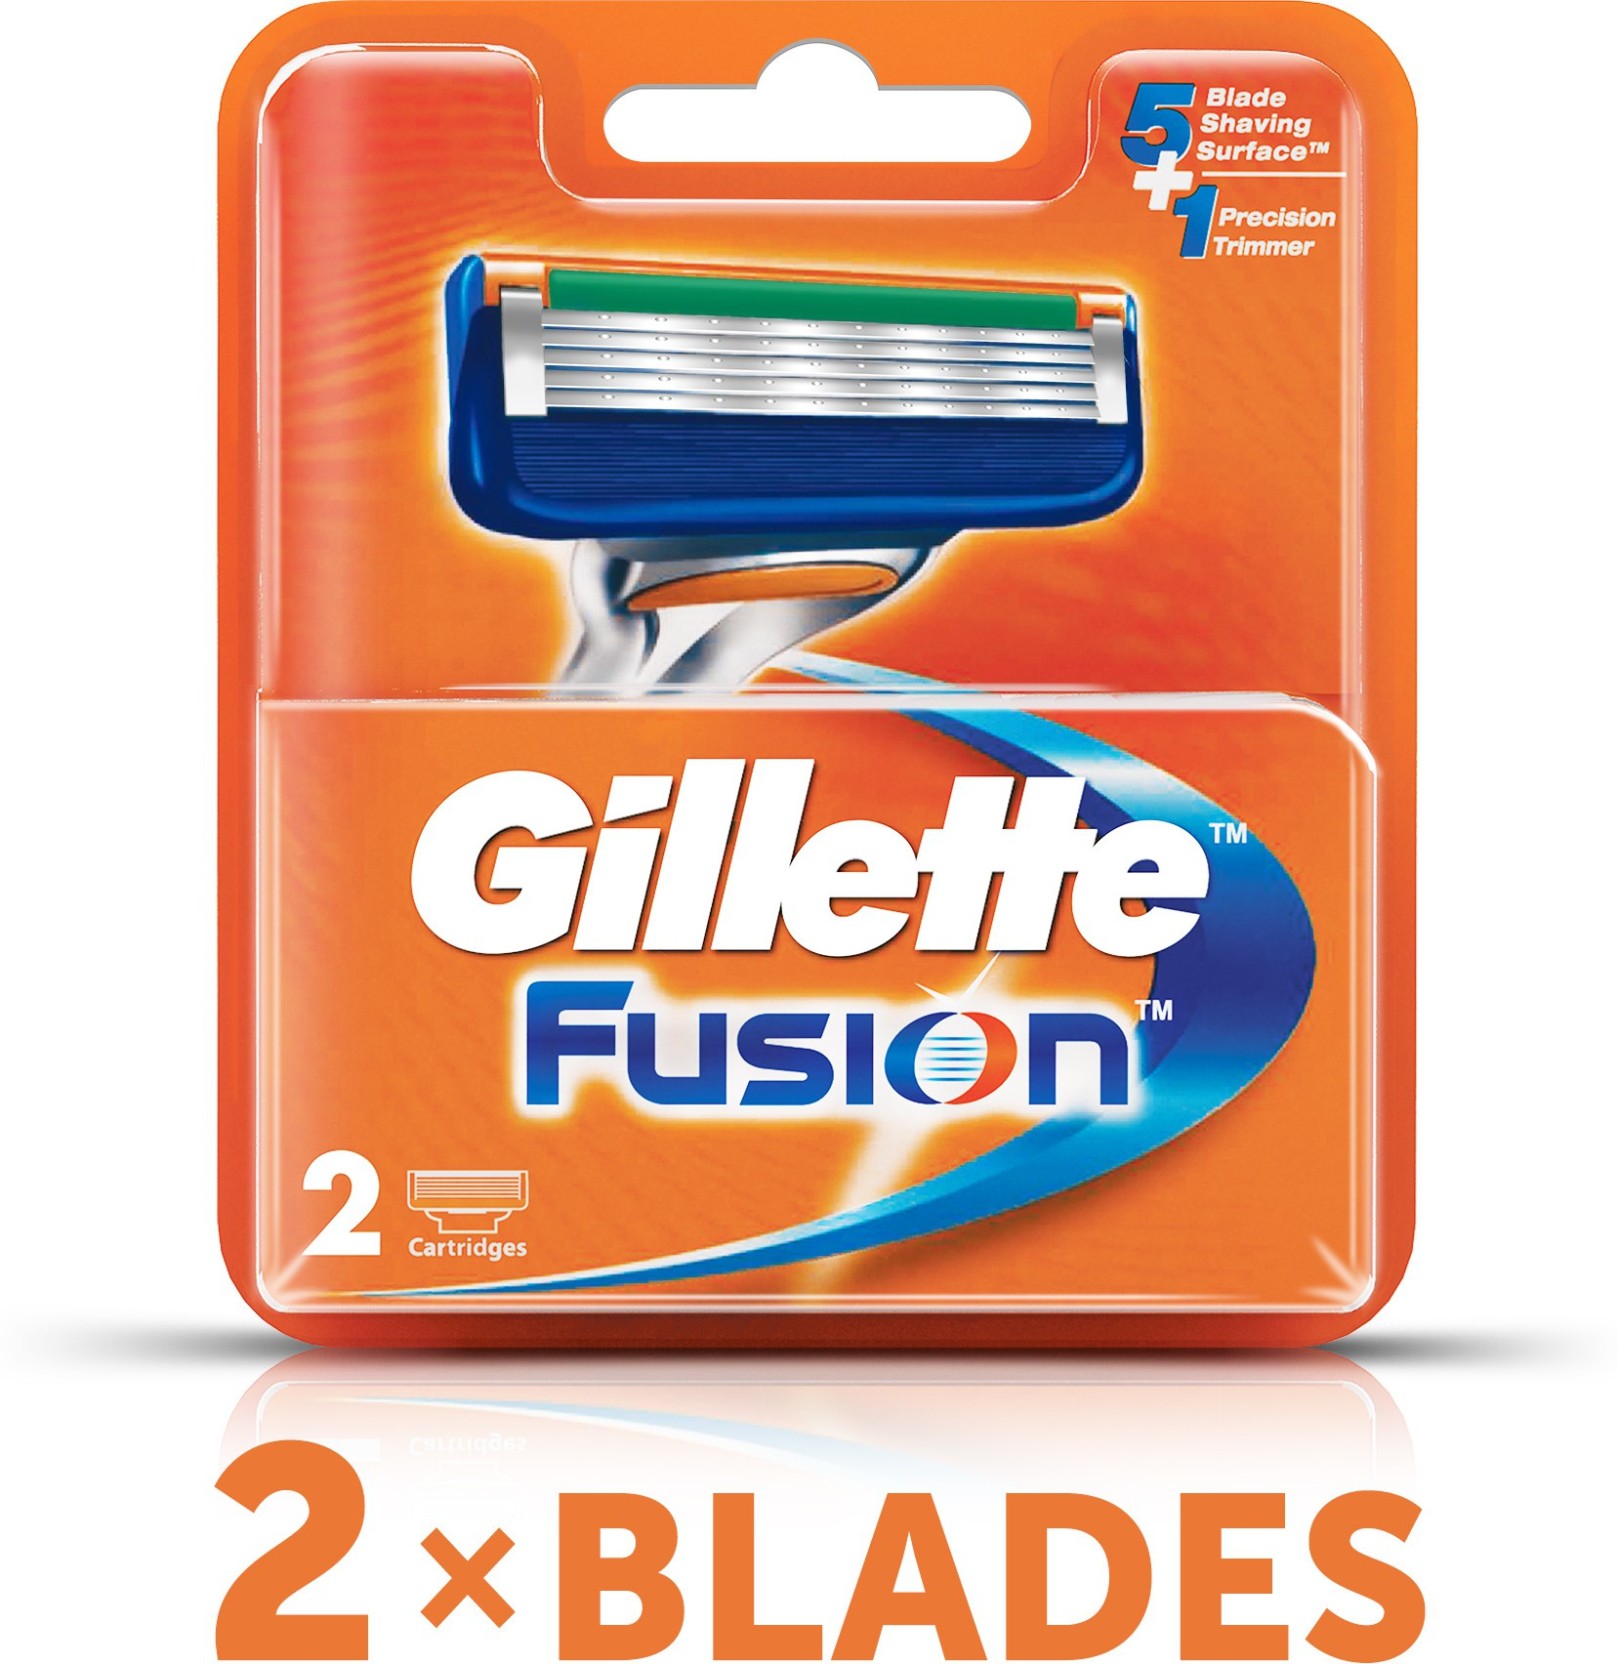 Gillette Fusion Cartridges Price In India Buy Gillette Fusion Cartridges Online In India